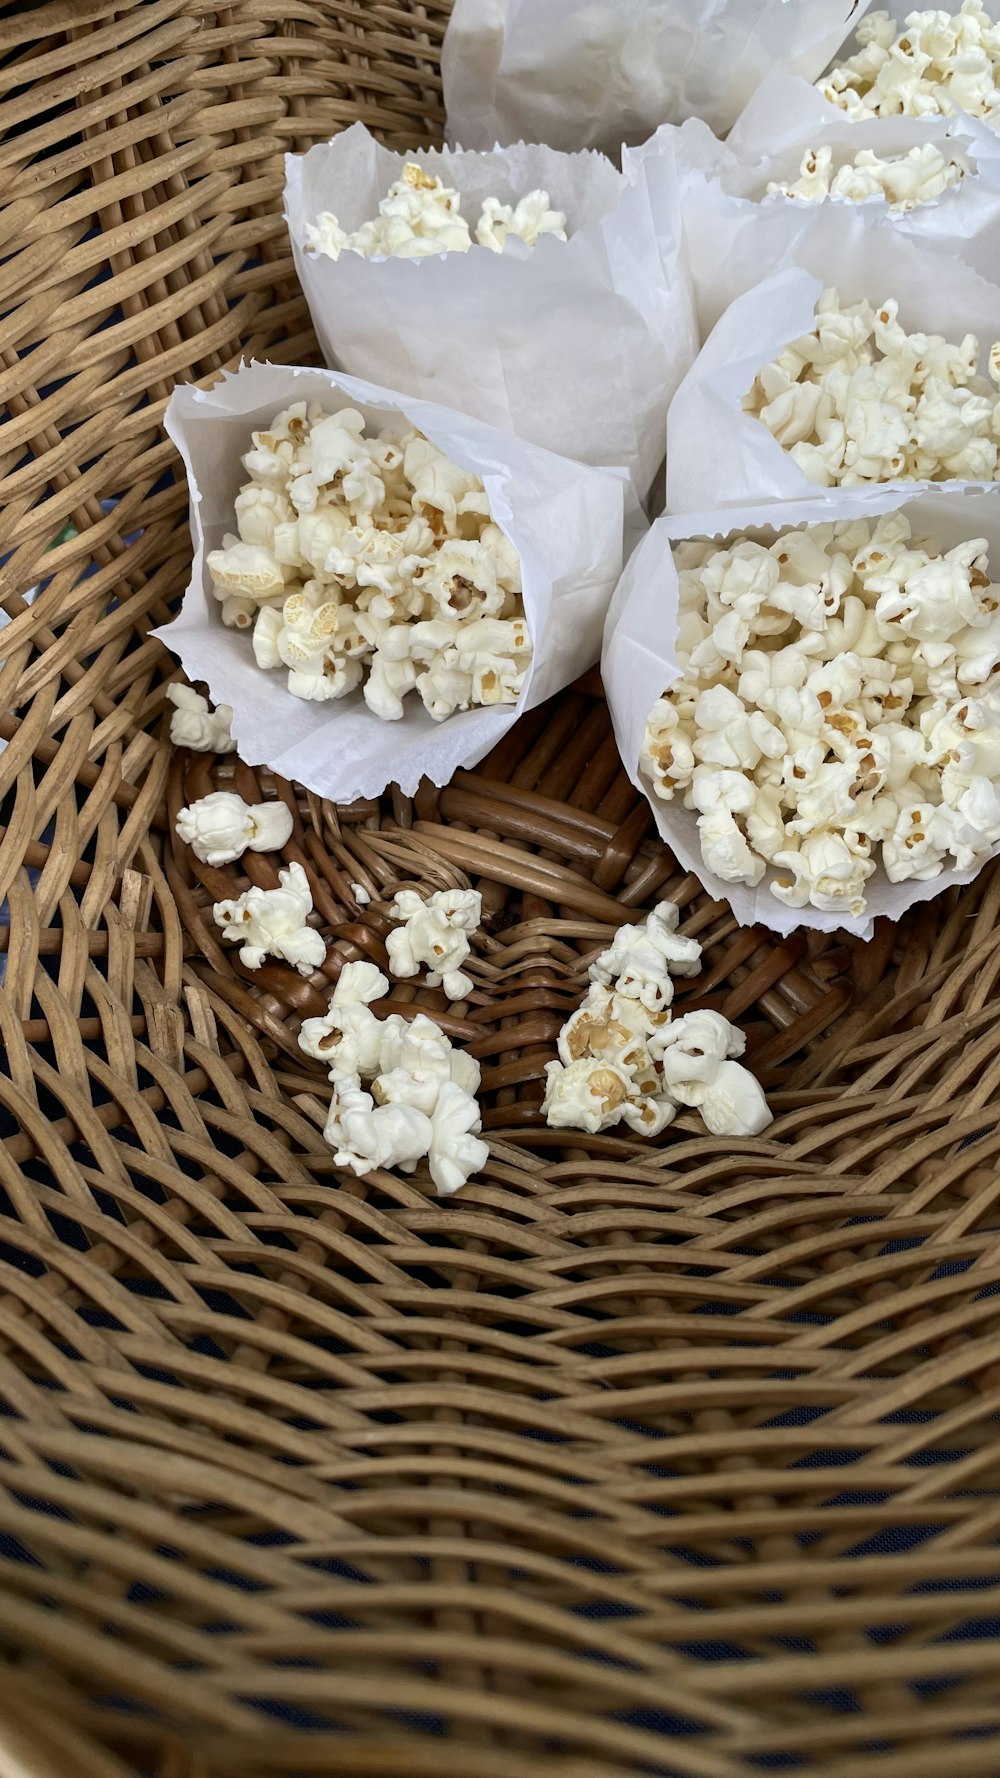 three bags of popcorn sitting on top of a wicker basket